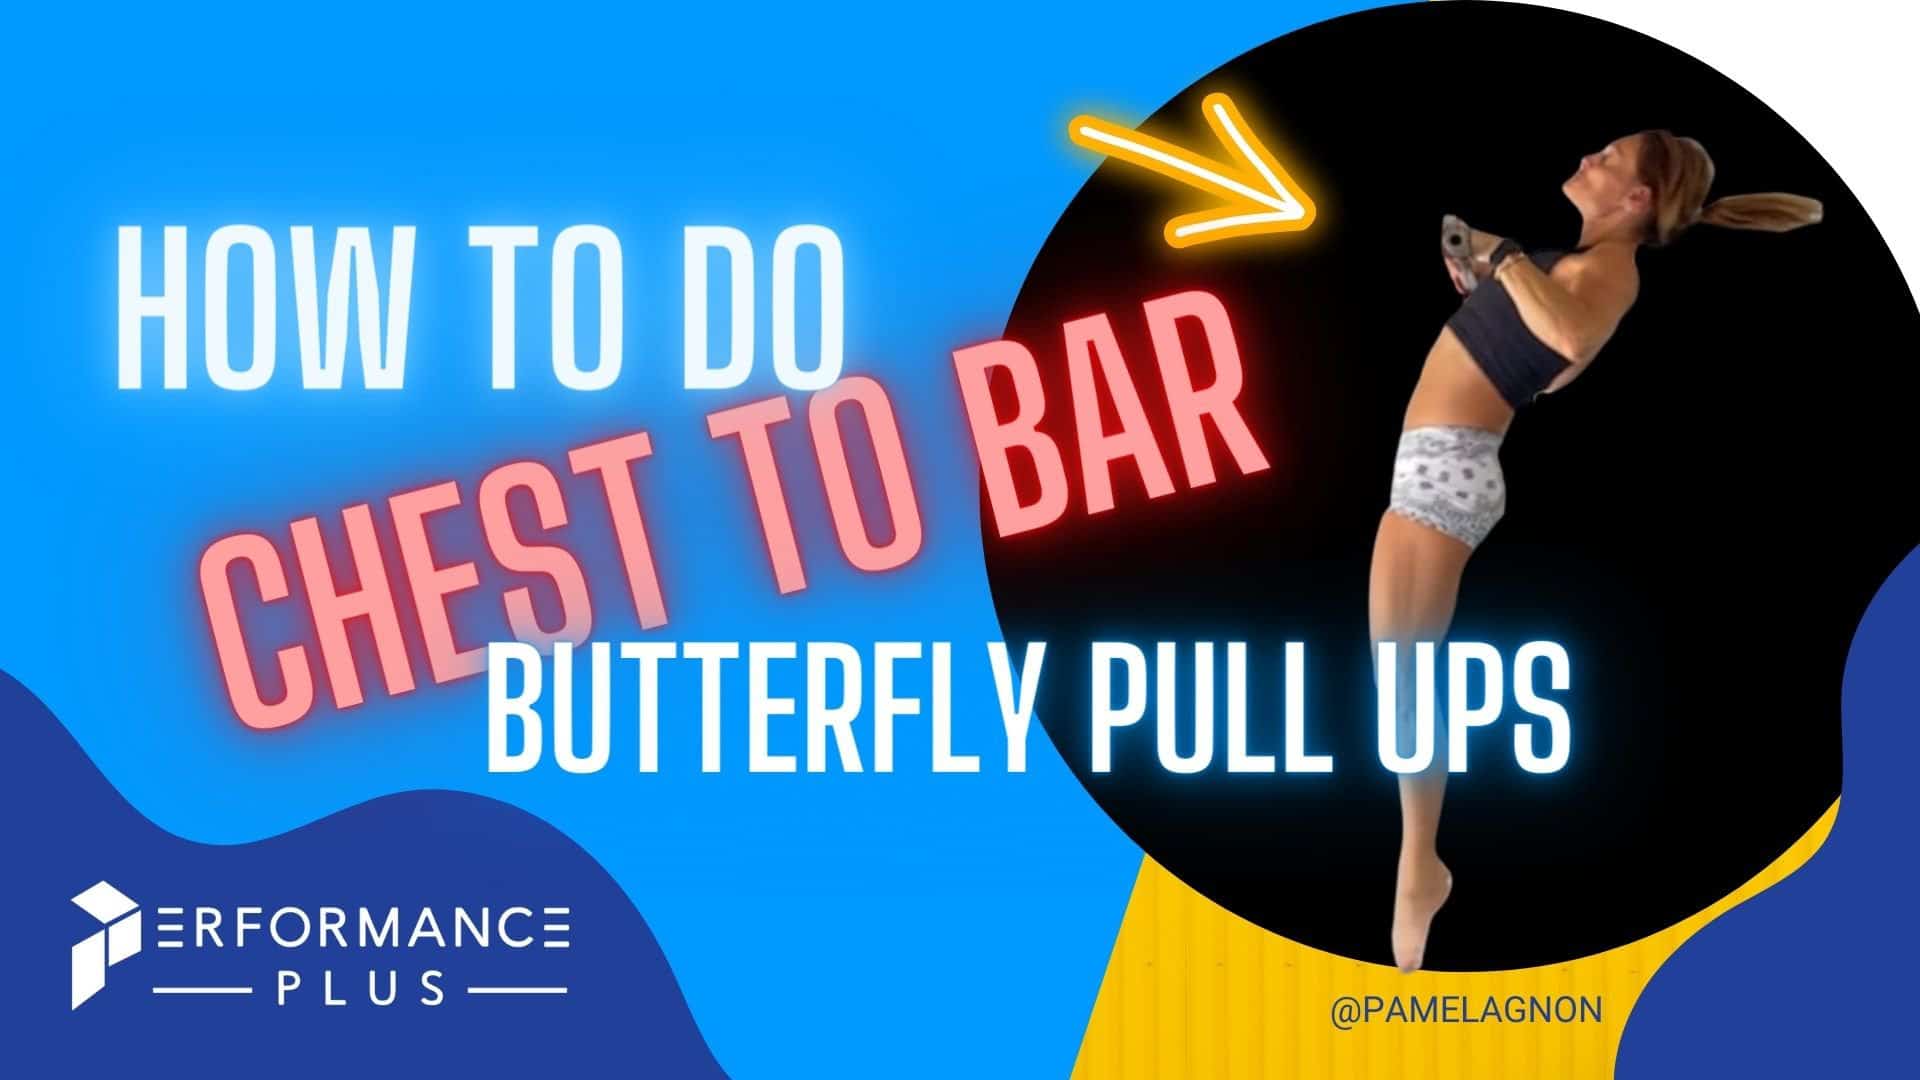 Butterfly chest to bar